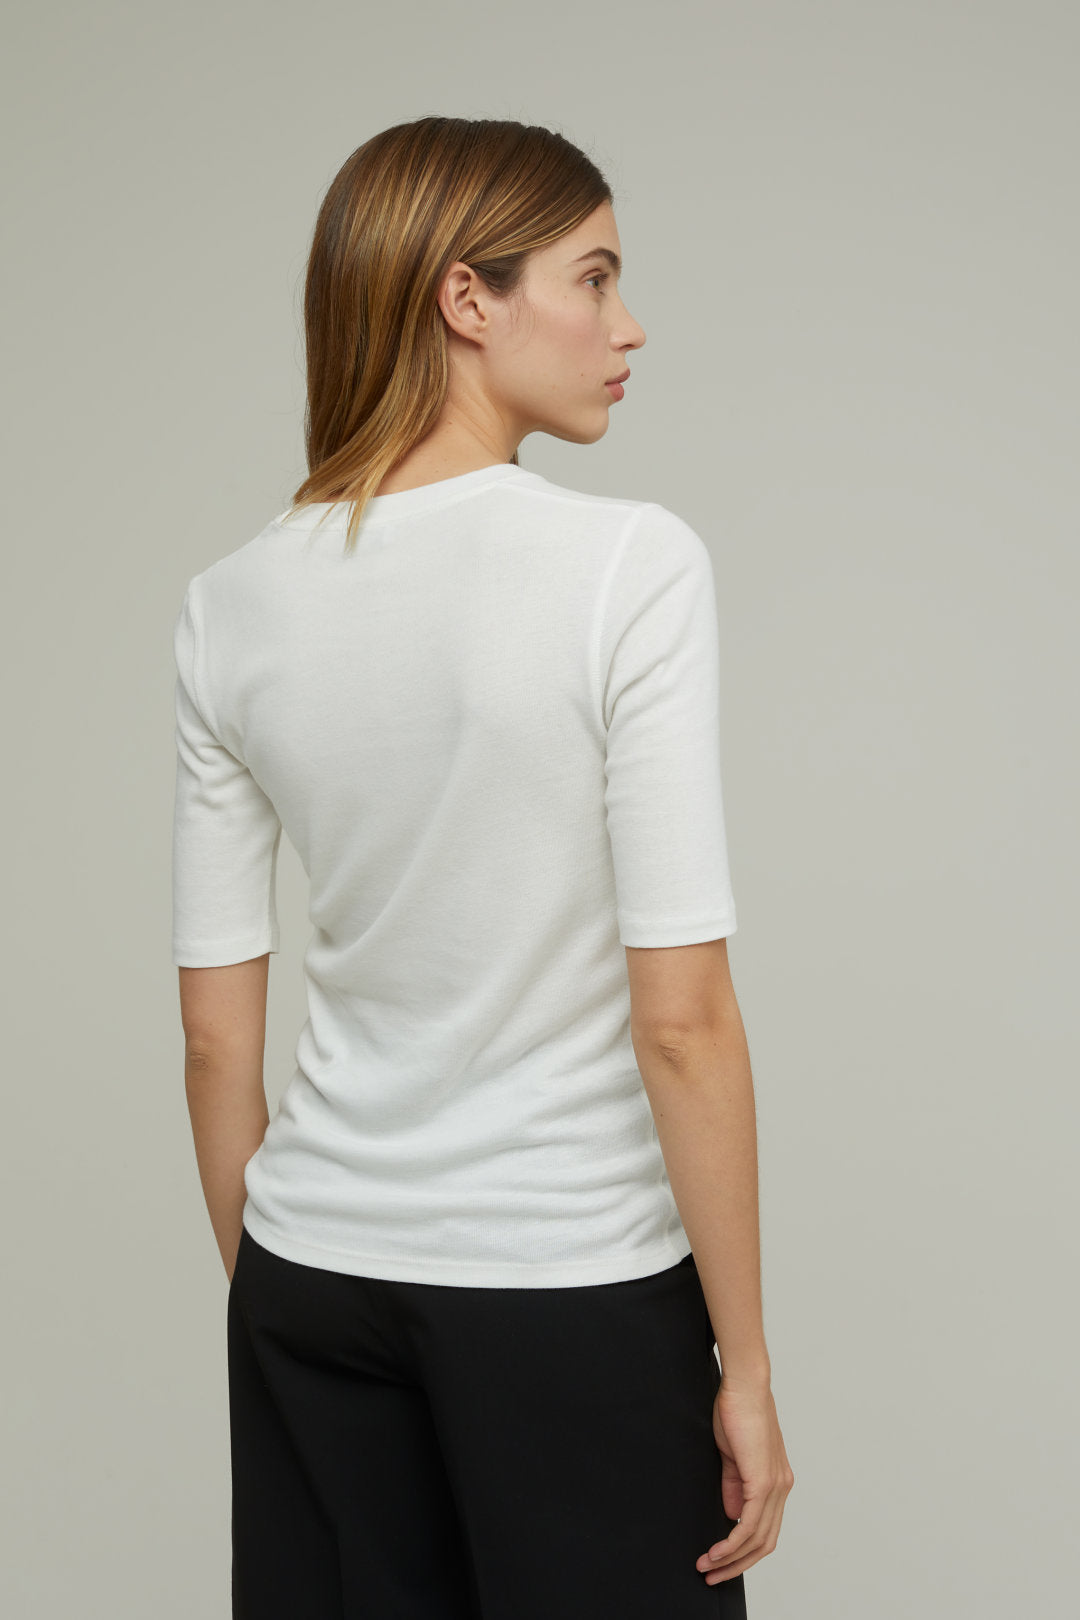 CLOSED RIB JERSEY BASIC TEE IVORY - S. LABELS